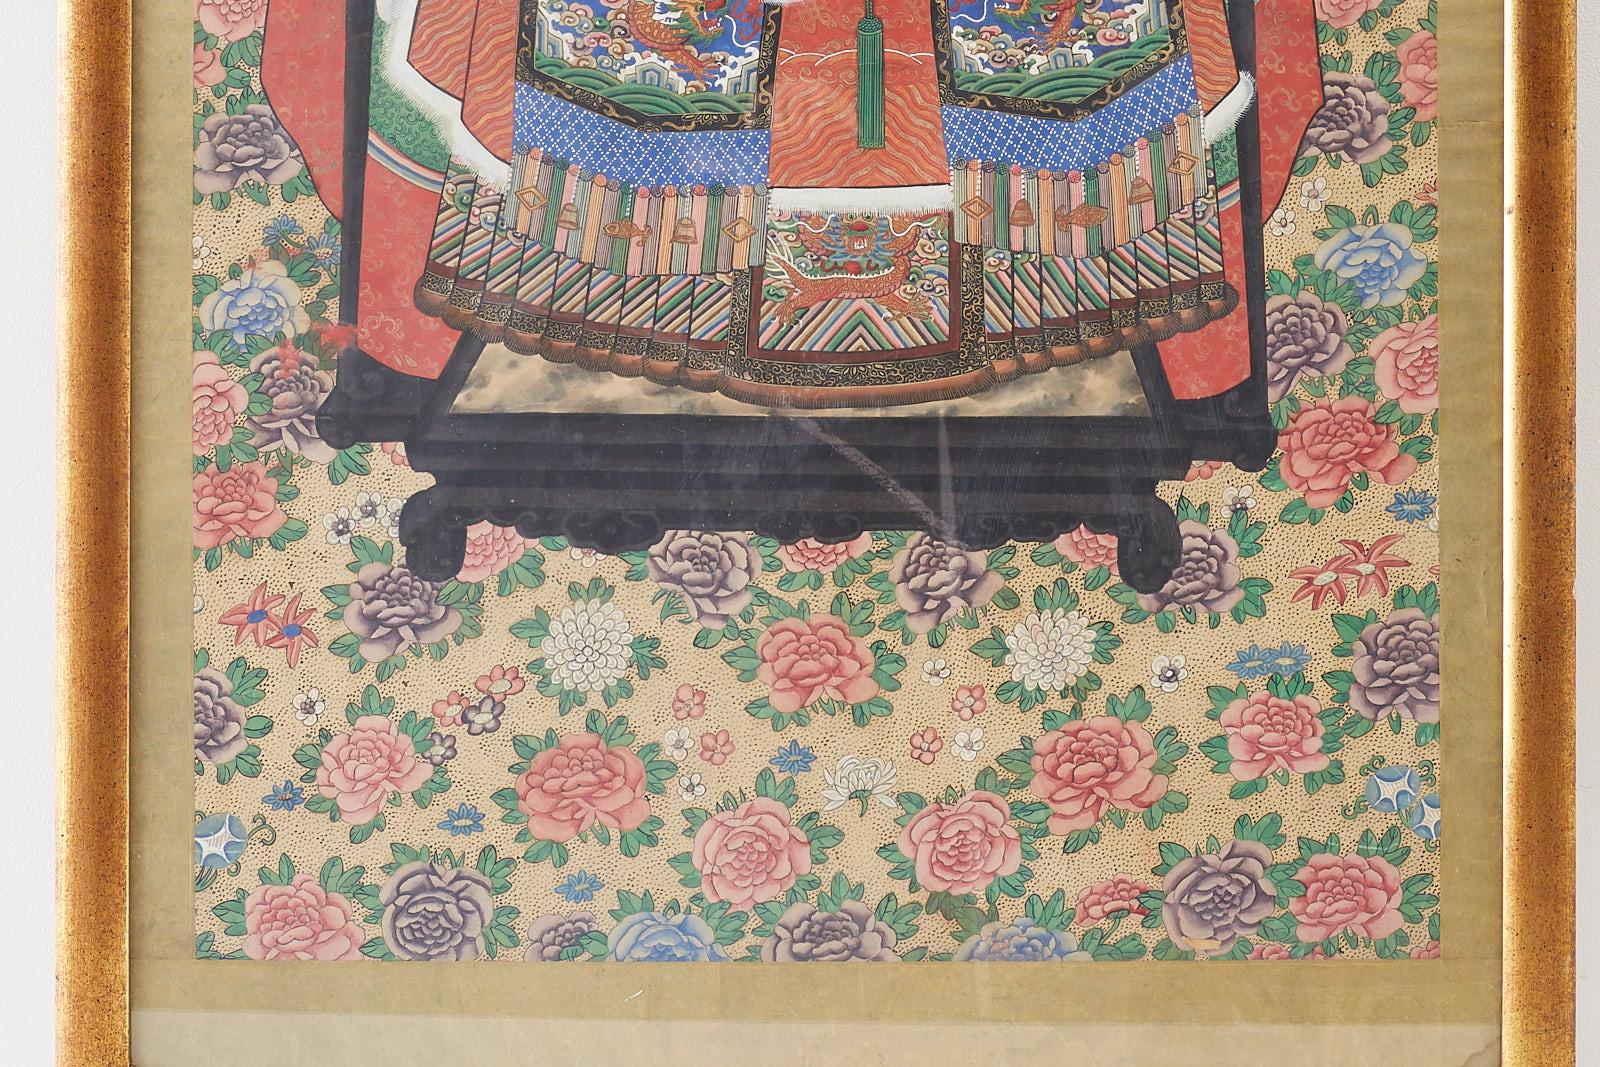 Hand-Painted Monumental Chinese Ancestral Matriarch Framed Scroll Painting